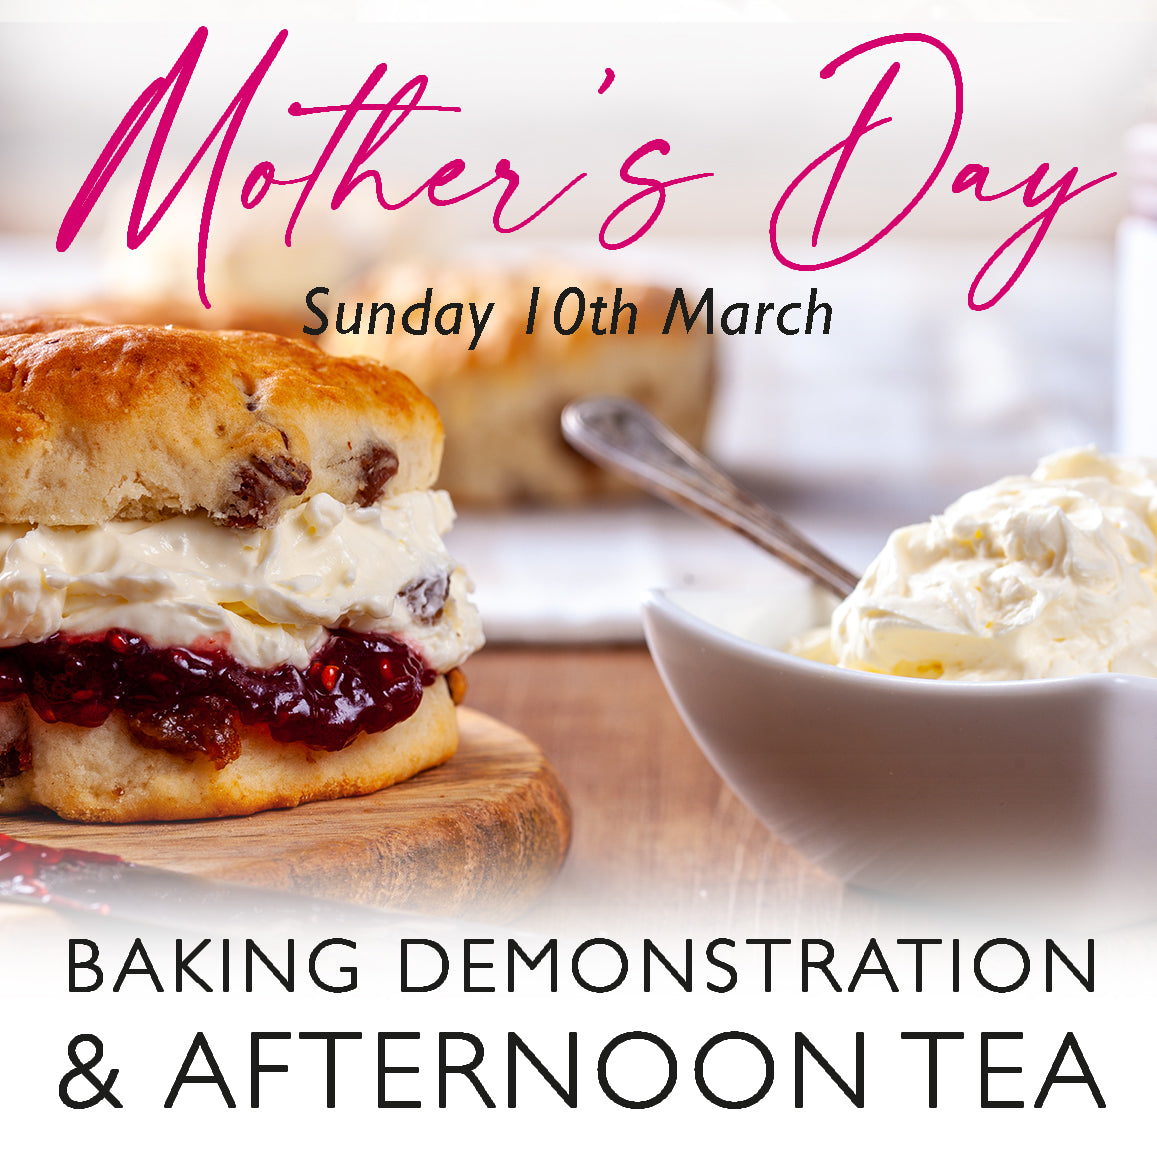 A scone full of jam and cream advertising a baking and afternoon tea demonstration